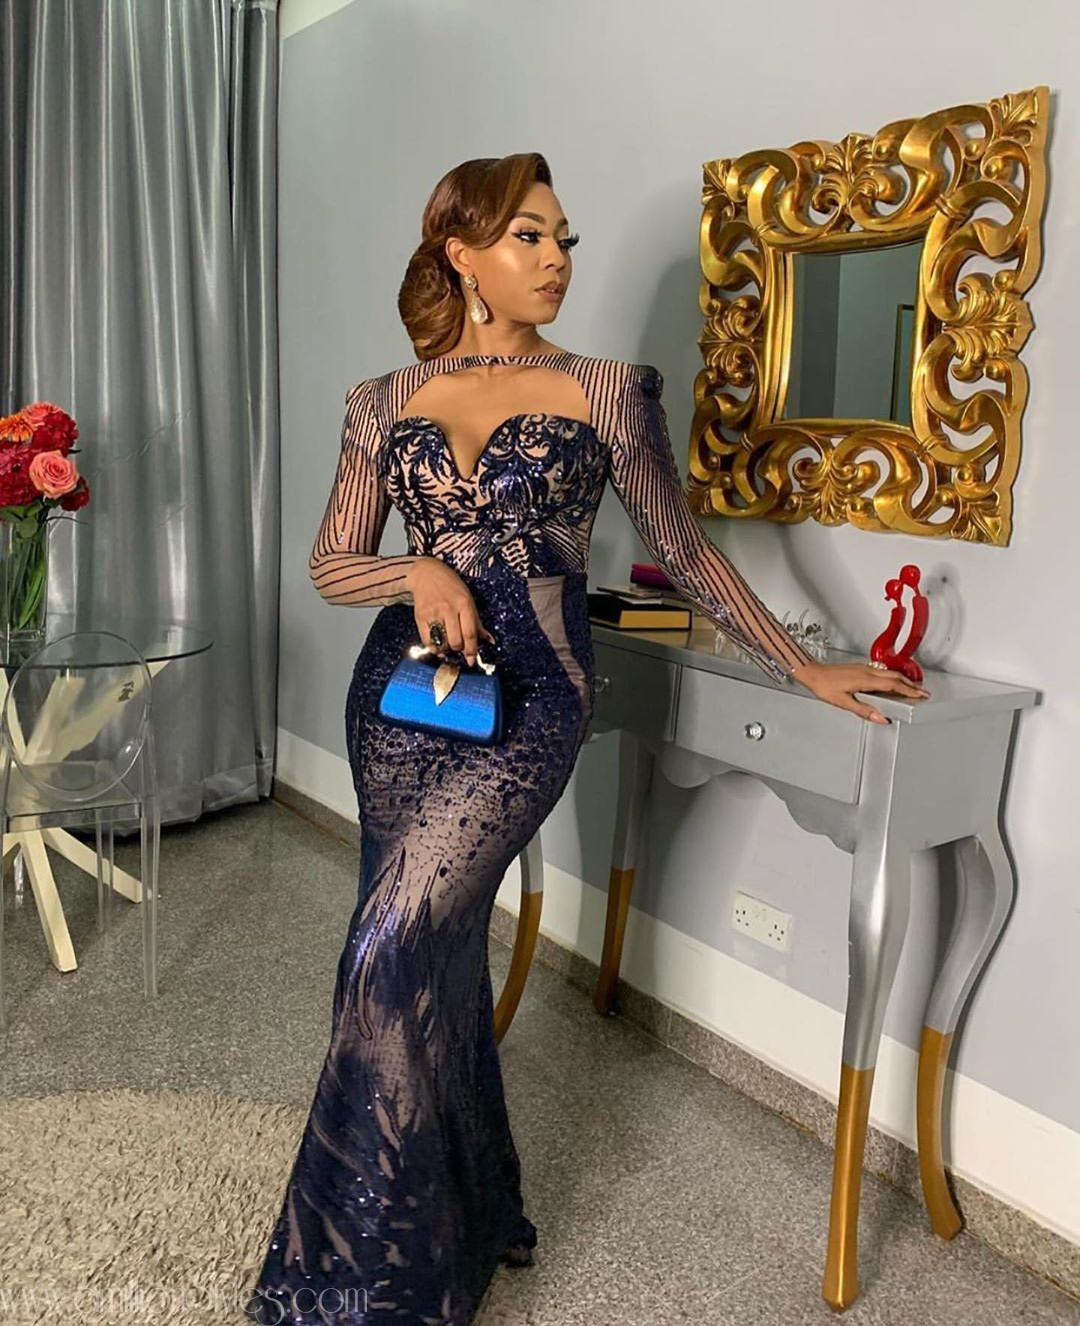 The Best Looks That Lit The Red Carpet Of The 2019 ELOY Awards